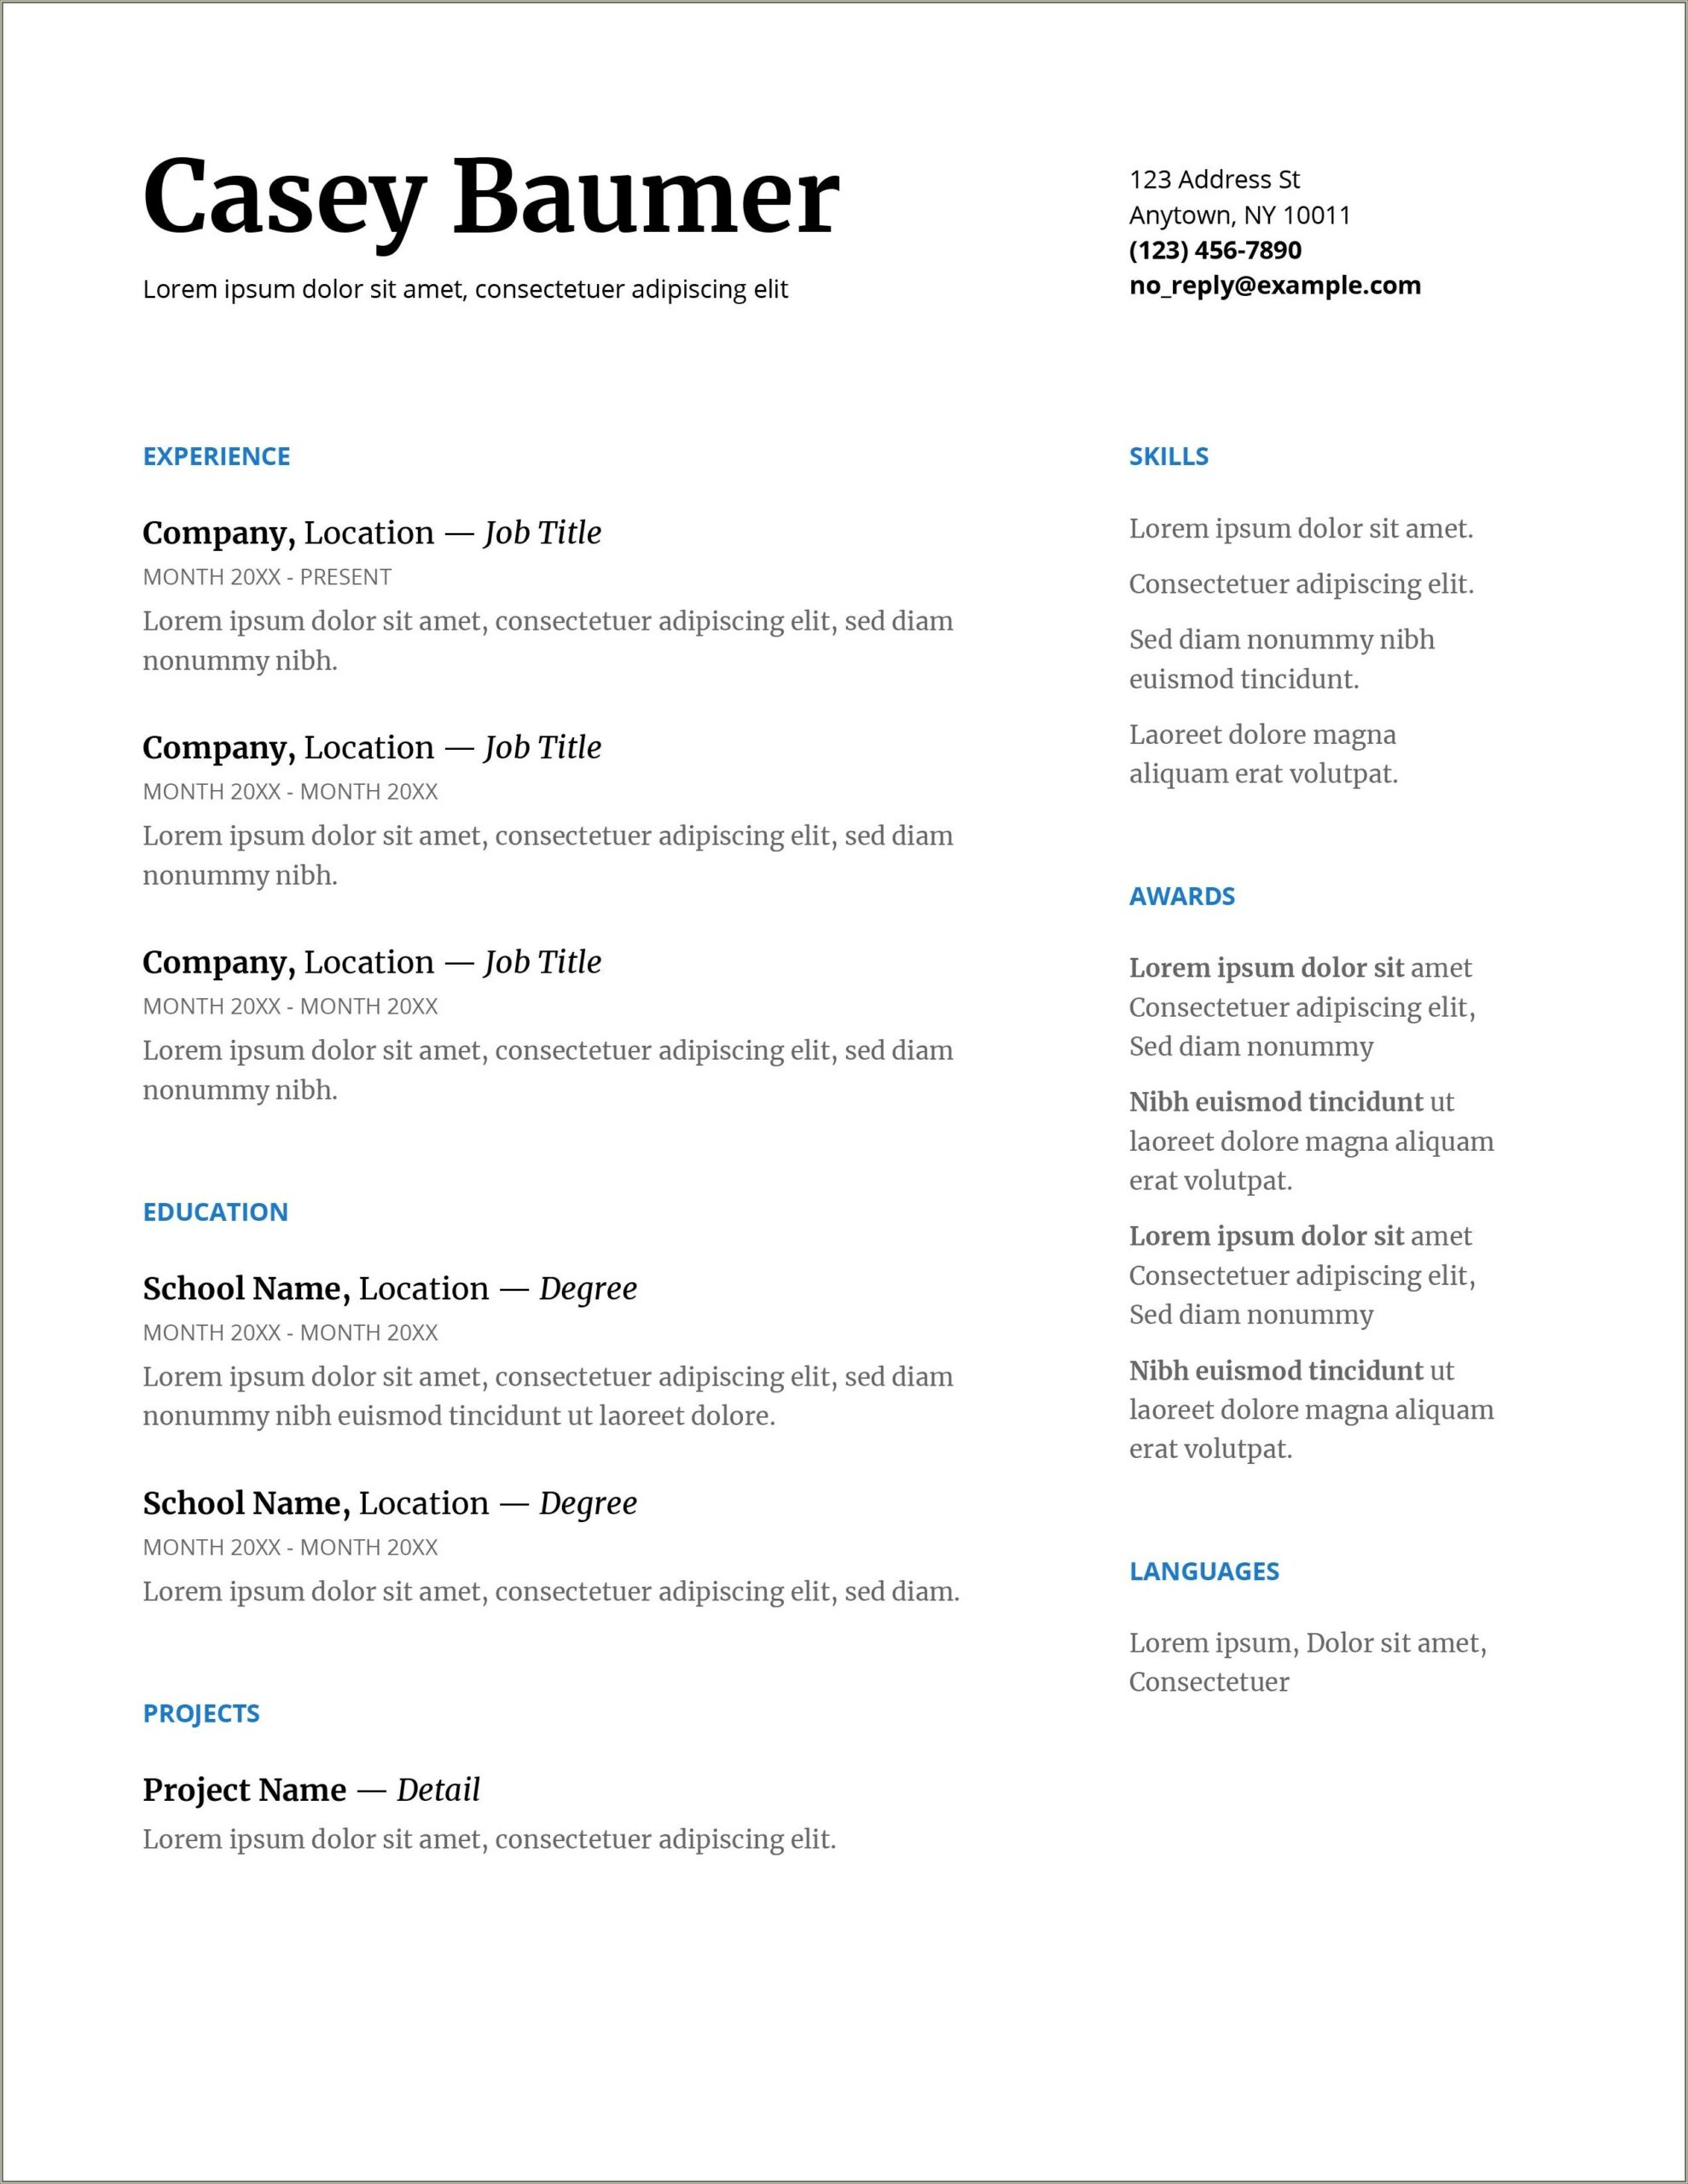 Basic Resume For A 16 Year Old Template